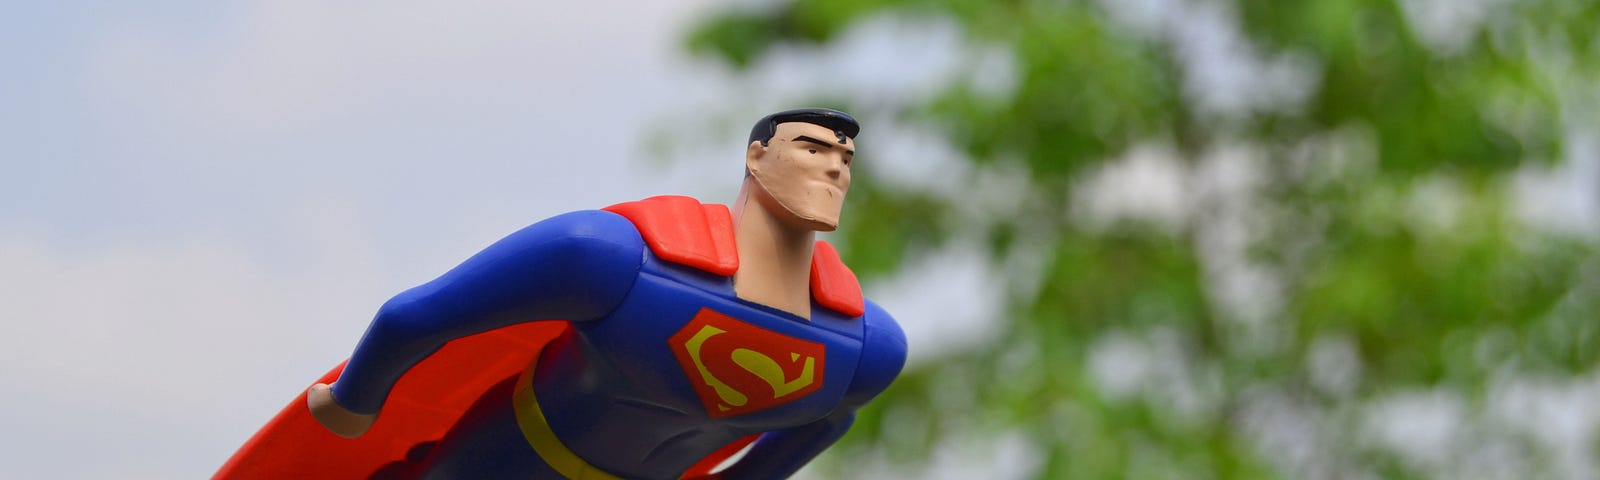 Image of a Superman figurine flying.